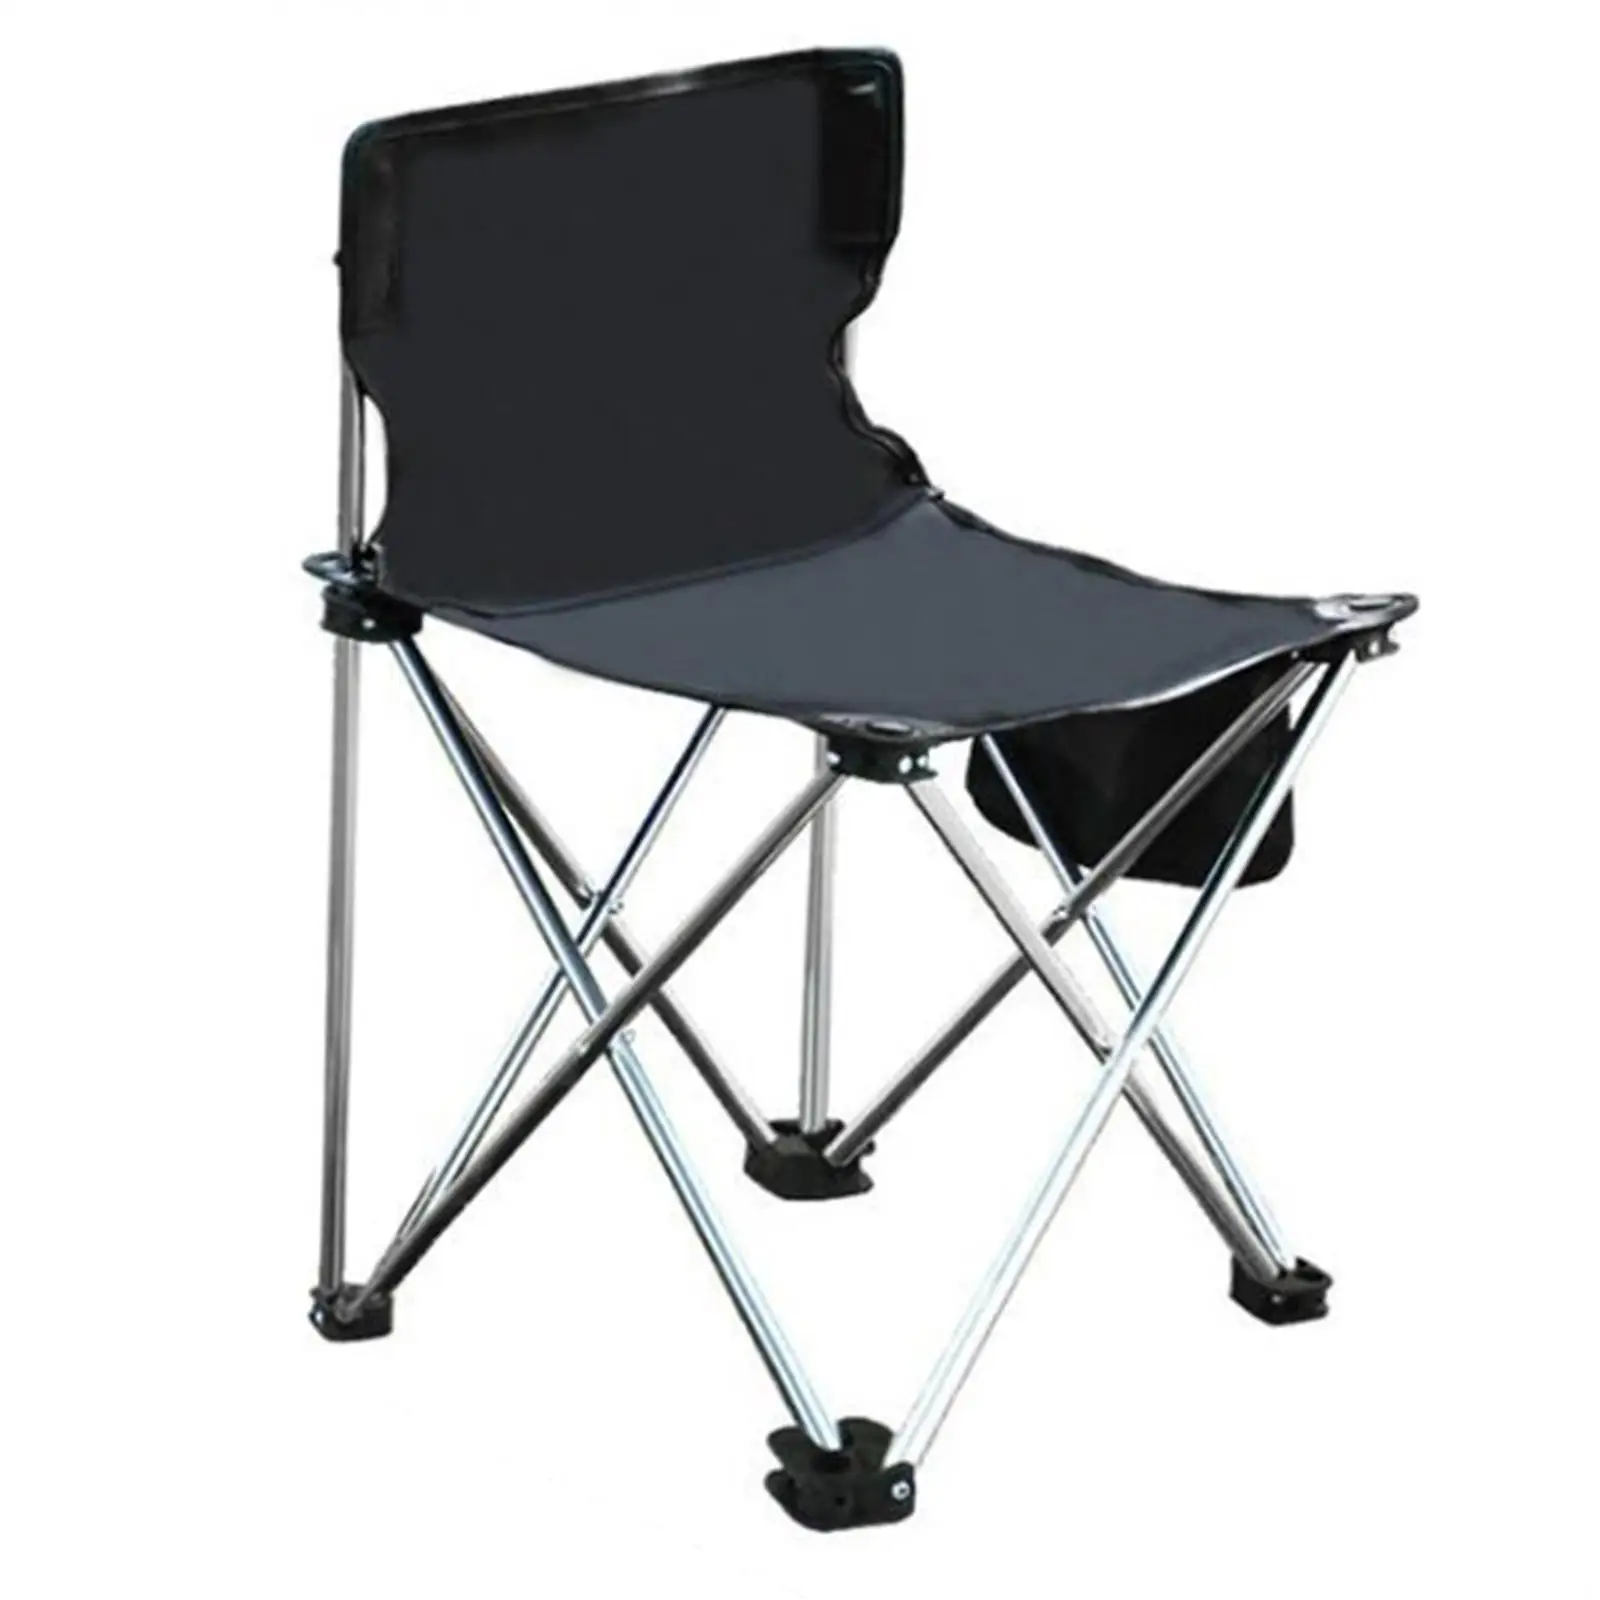 Portable Camping Chair High Back for Heavy People Folding Chair for Outside Collapsible Chair for Park Beach Patio Lawn Hiking